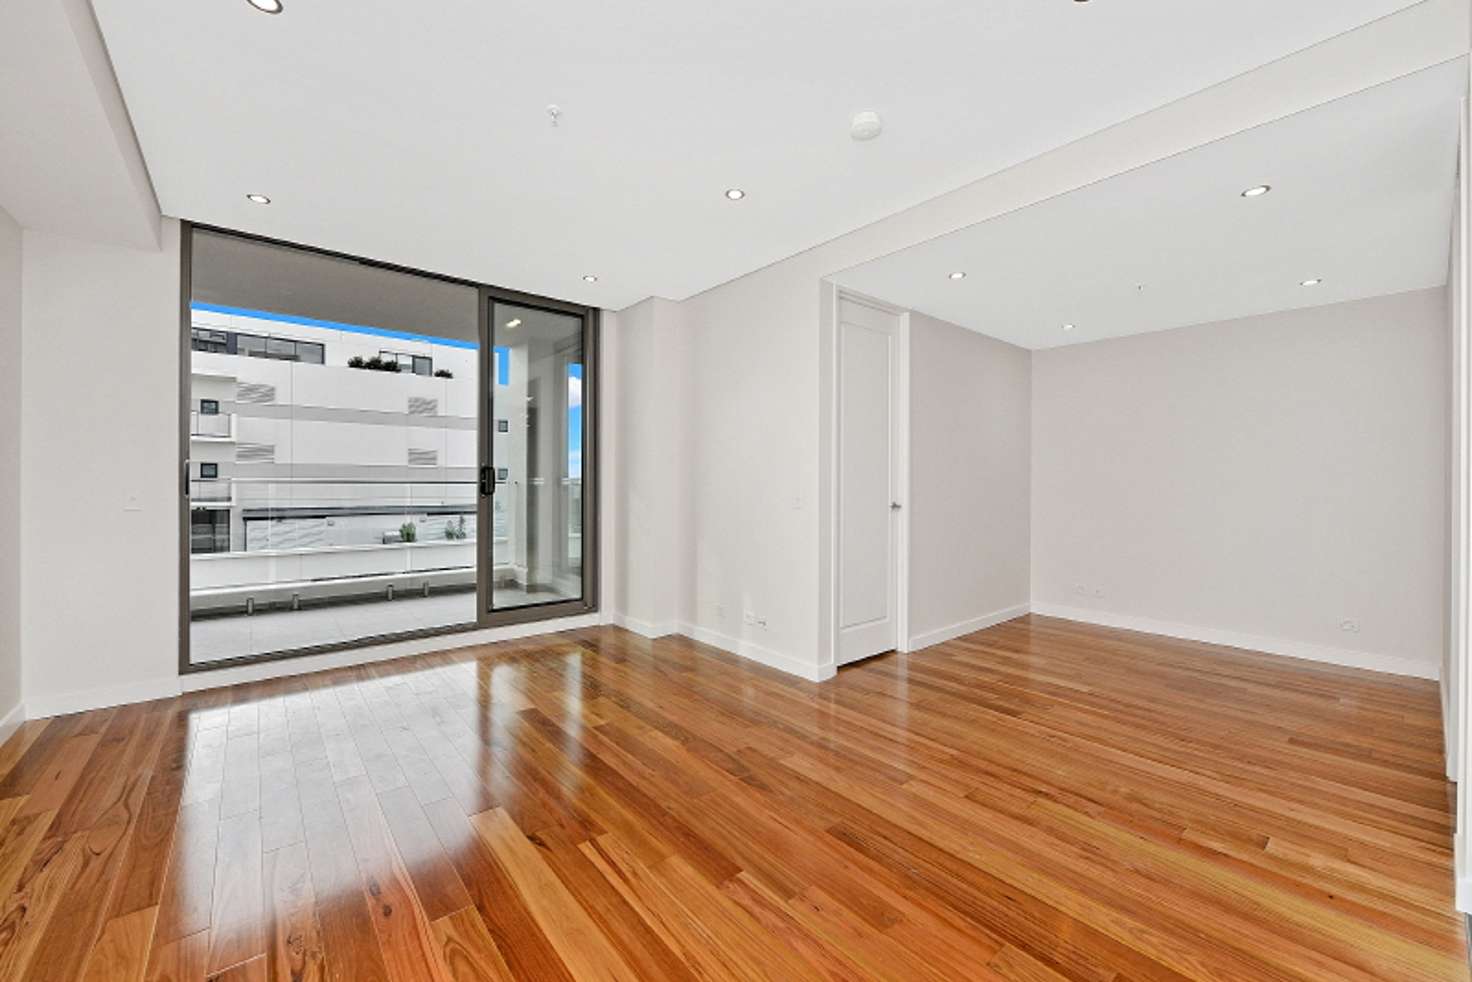 Main view of Homely apartment listing, 502/5 Atchison St, St Leonards NSW 2065